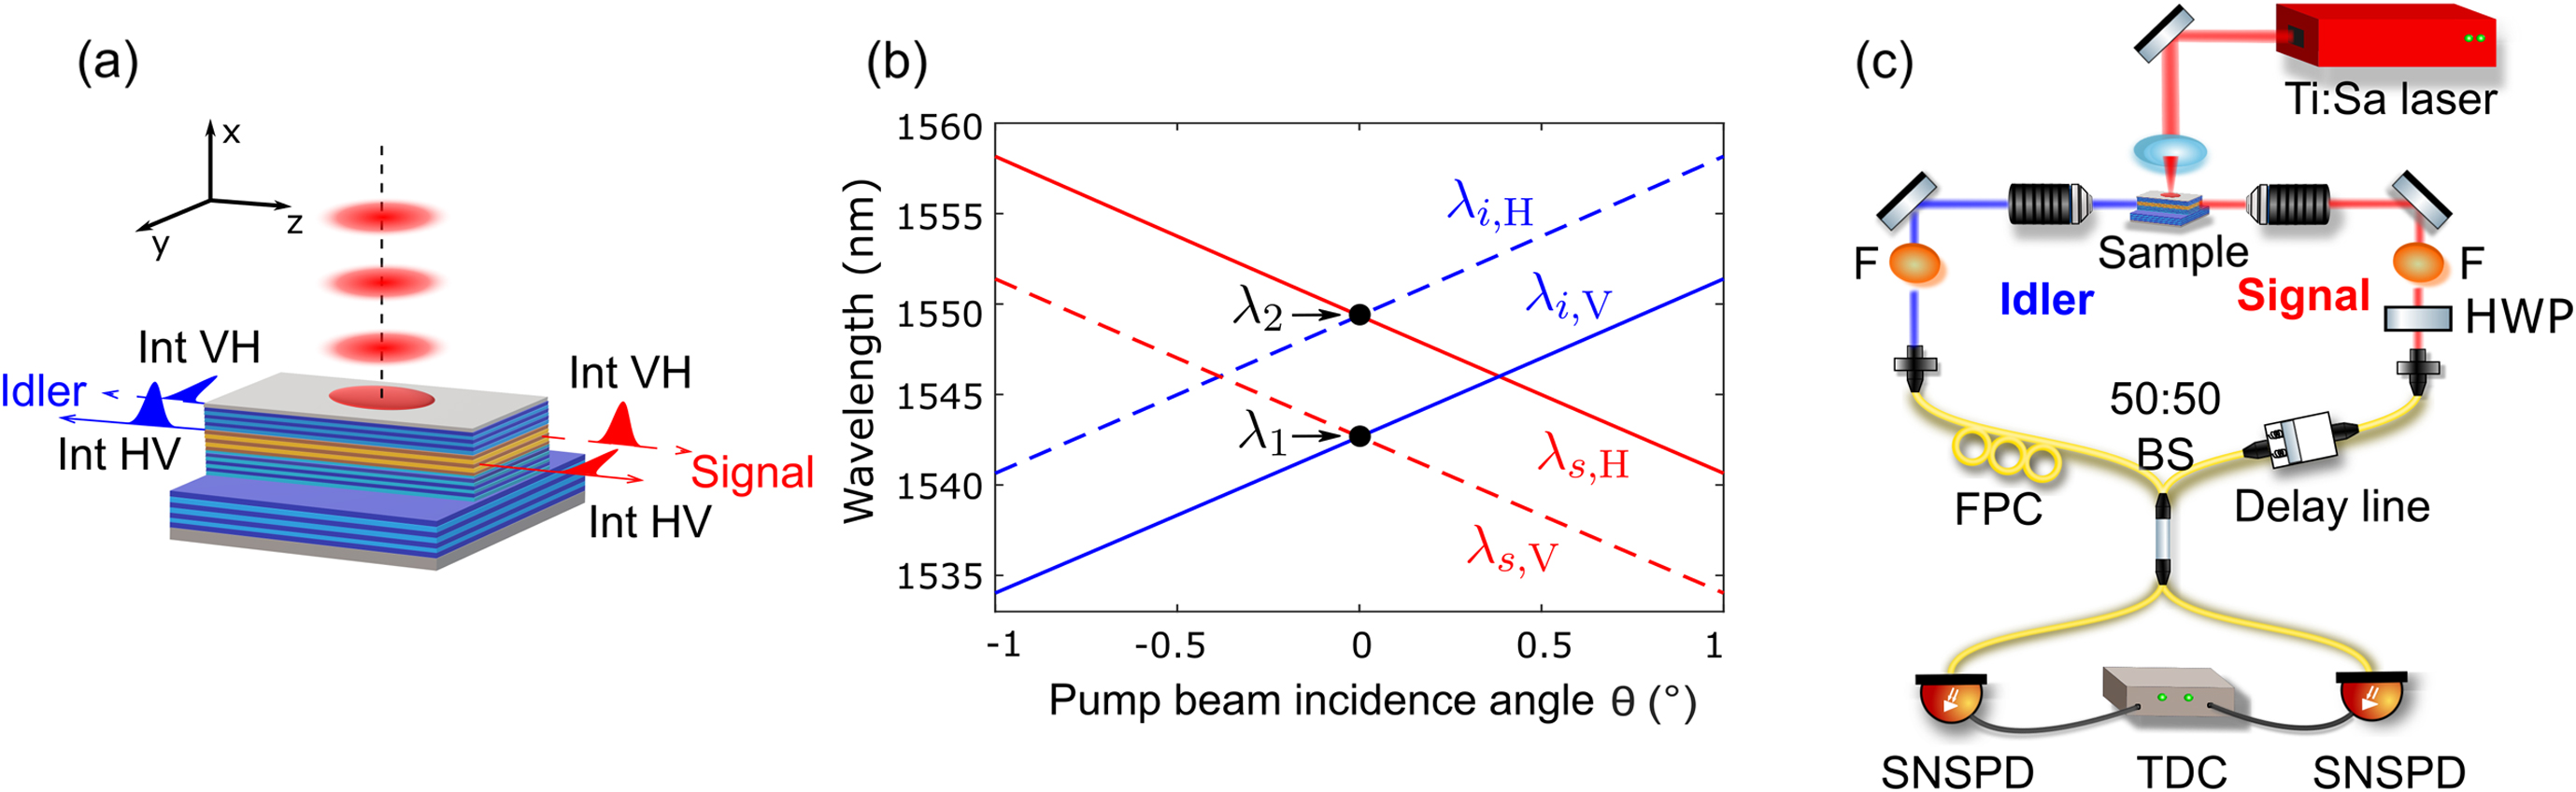 (a) Schematic of an AlGaAs ridge microcavity emitting counterpropagating twin photons by SPDC in a transverse pump geometry. Two type-II interactions occur, generating either an H-polarized signal photon and a V-polarized idler photon (interaction HV), or the opposite situation (interaction VH), resulting in a hybrid polarization–frequency entangled state. (b) Calculated SPDC tunability curve, showing the central wavelengths of signal and idler photons as a function of the pump incidence angle θ (with respect to the vertical x axis), for both interactions, using our sample properties and pump central wavelength λp=773.15 nm. (c) Sketch of the experimental setup to measure the HOM interference of the hybrid polarization–frequency state. HWP, half-wave plate; F, frequency filter; FPC, fibered polarization controller; BS, beam splitter; SNSPD, superconducting nanowire single-photon detector; TDC, time-to-digital converter.